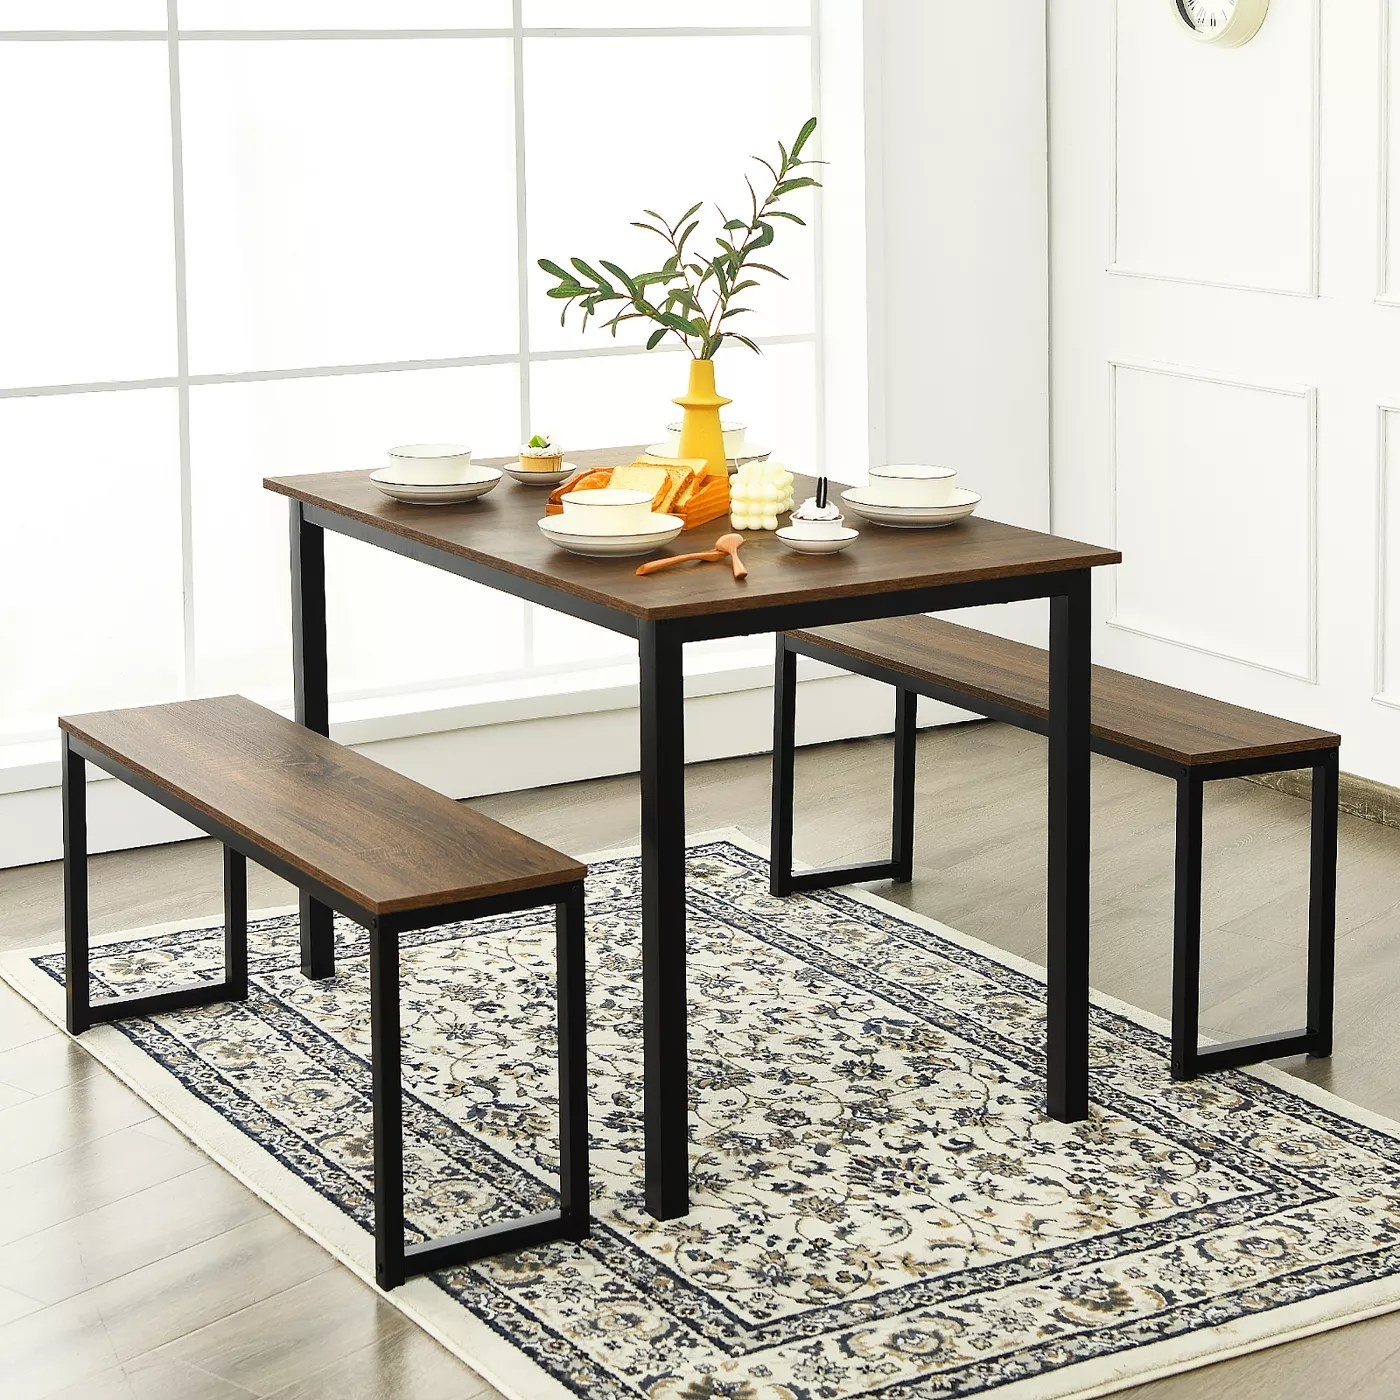 The brown and black table set